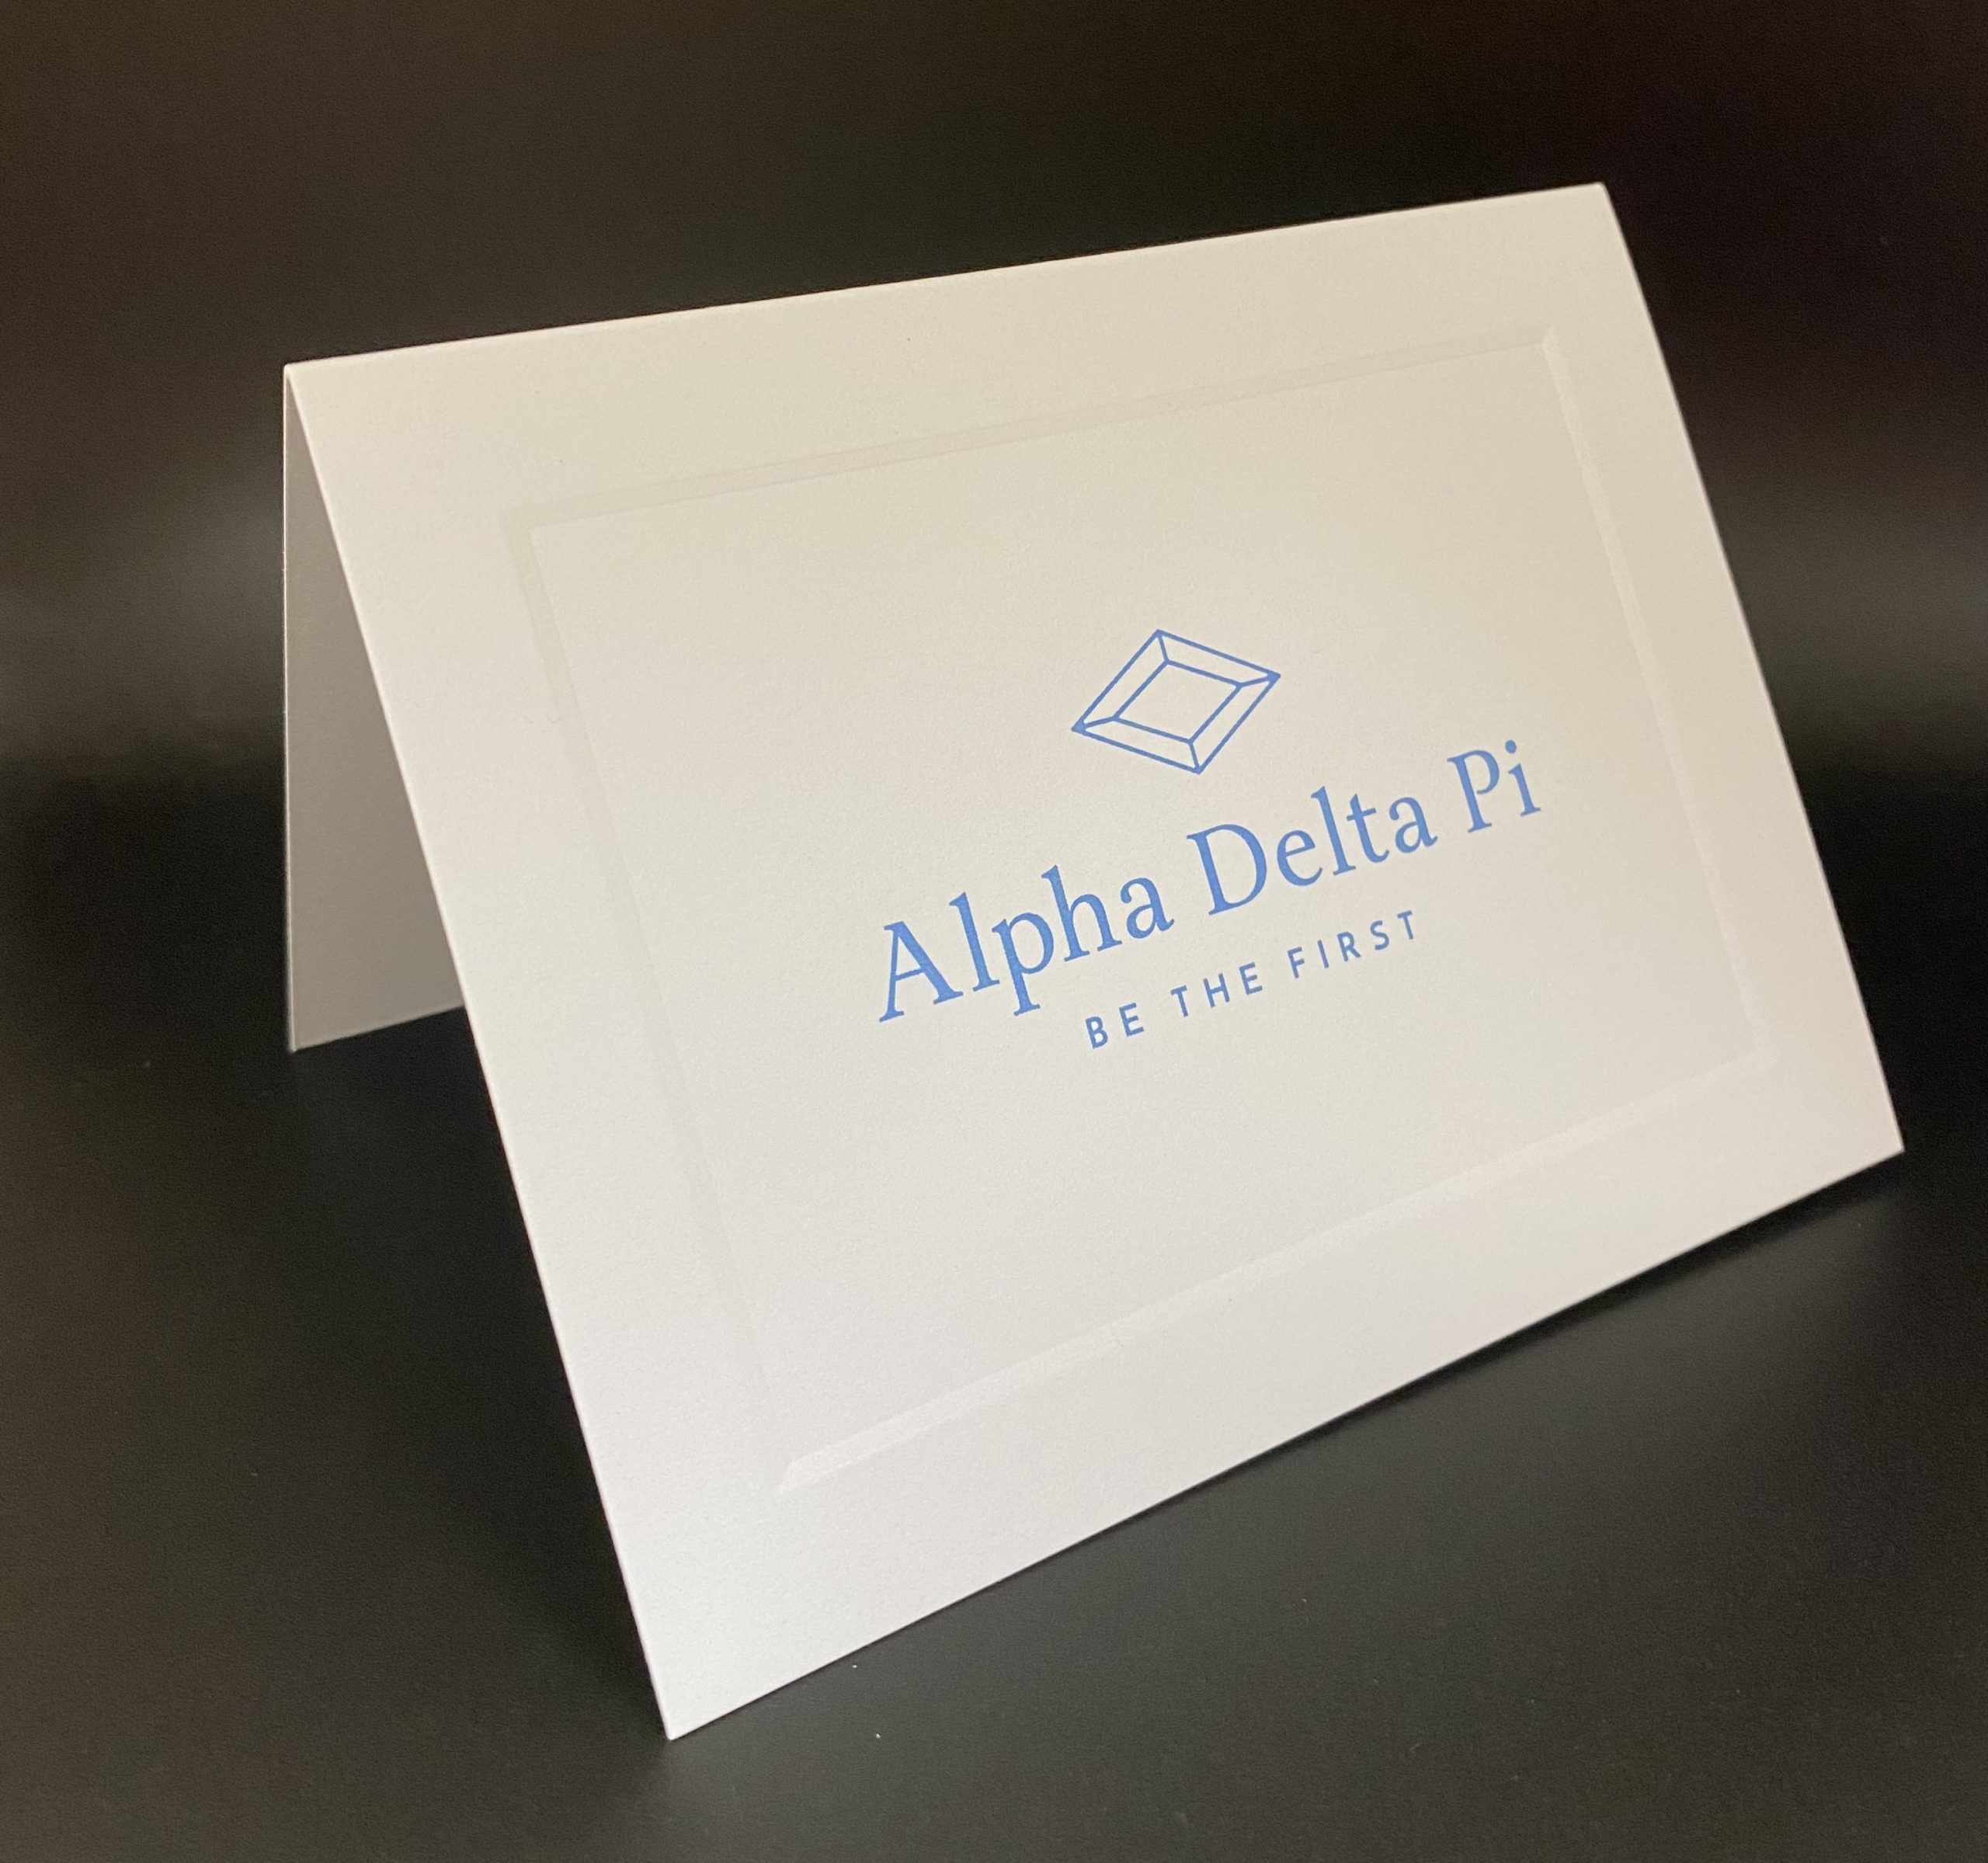 Official Notecards With New Graphic Standard Alpha Delta Pi